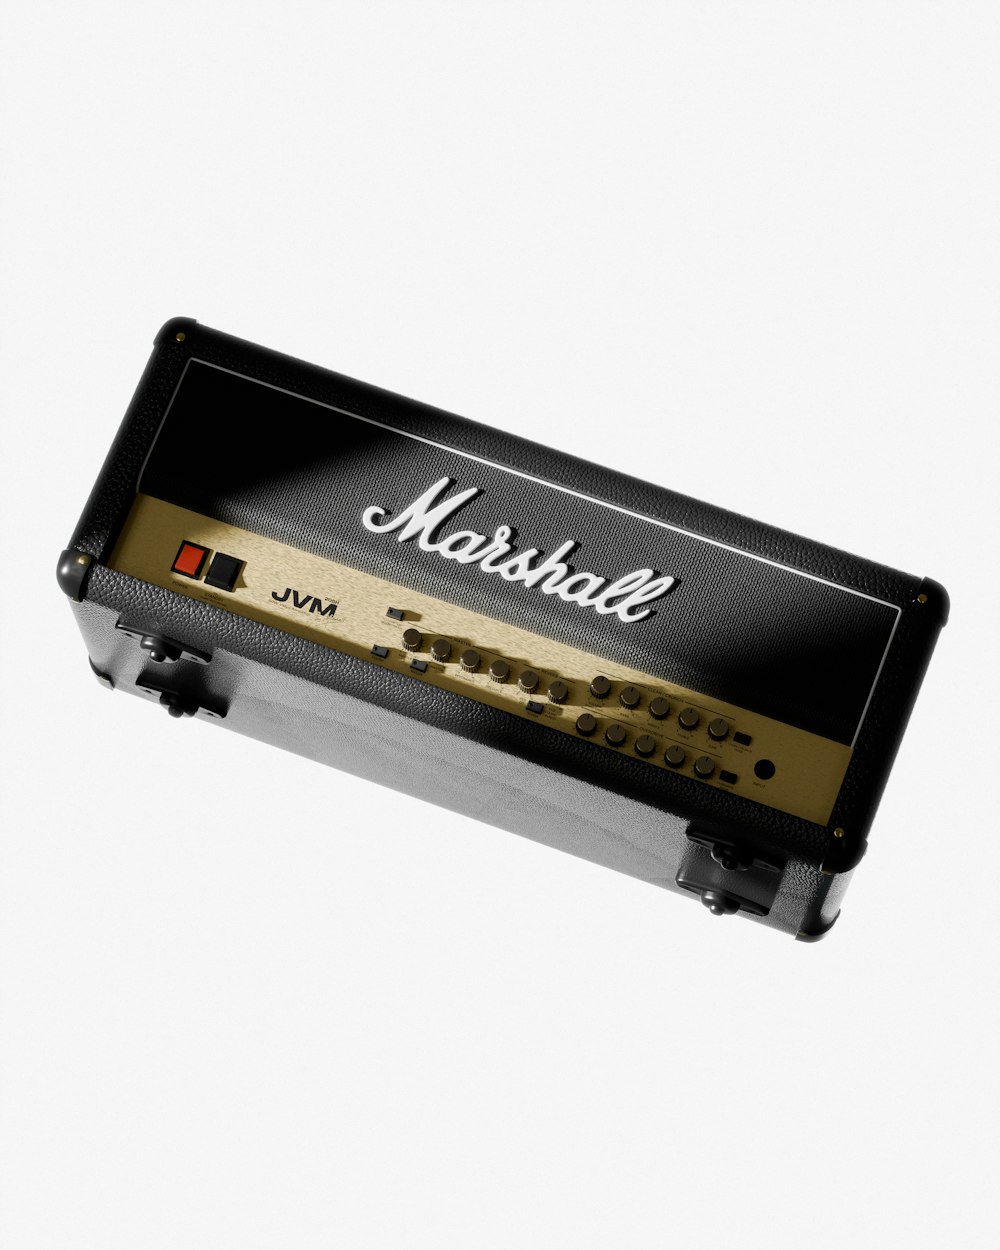 a black and gold amplifier with the words marshall on it